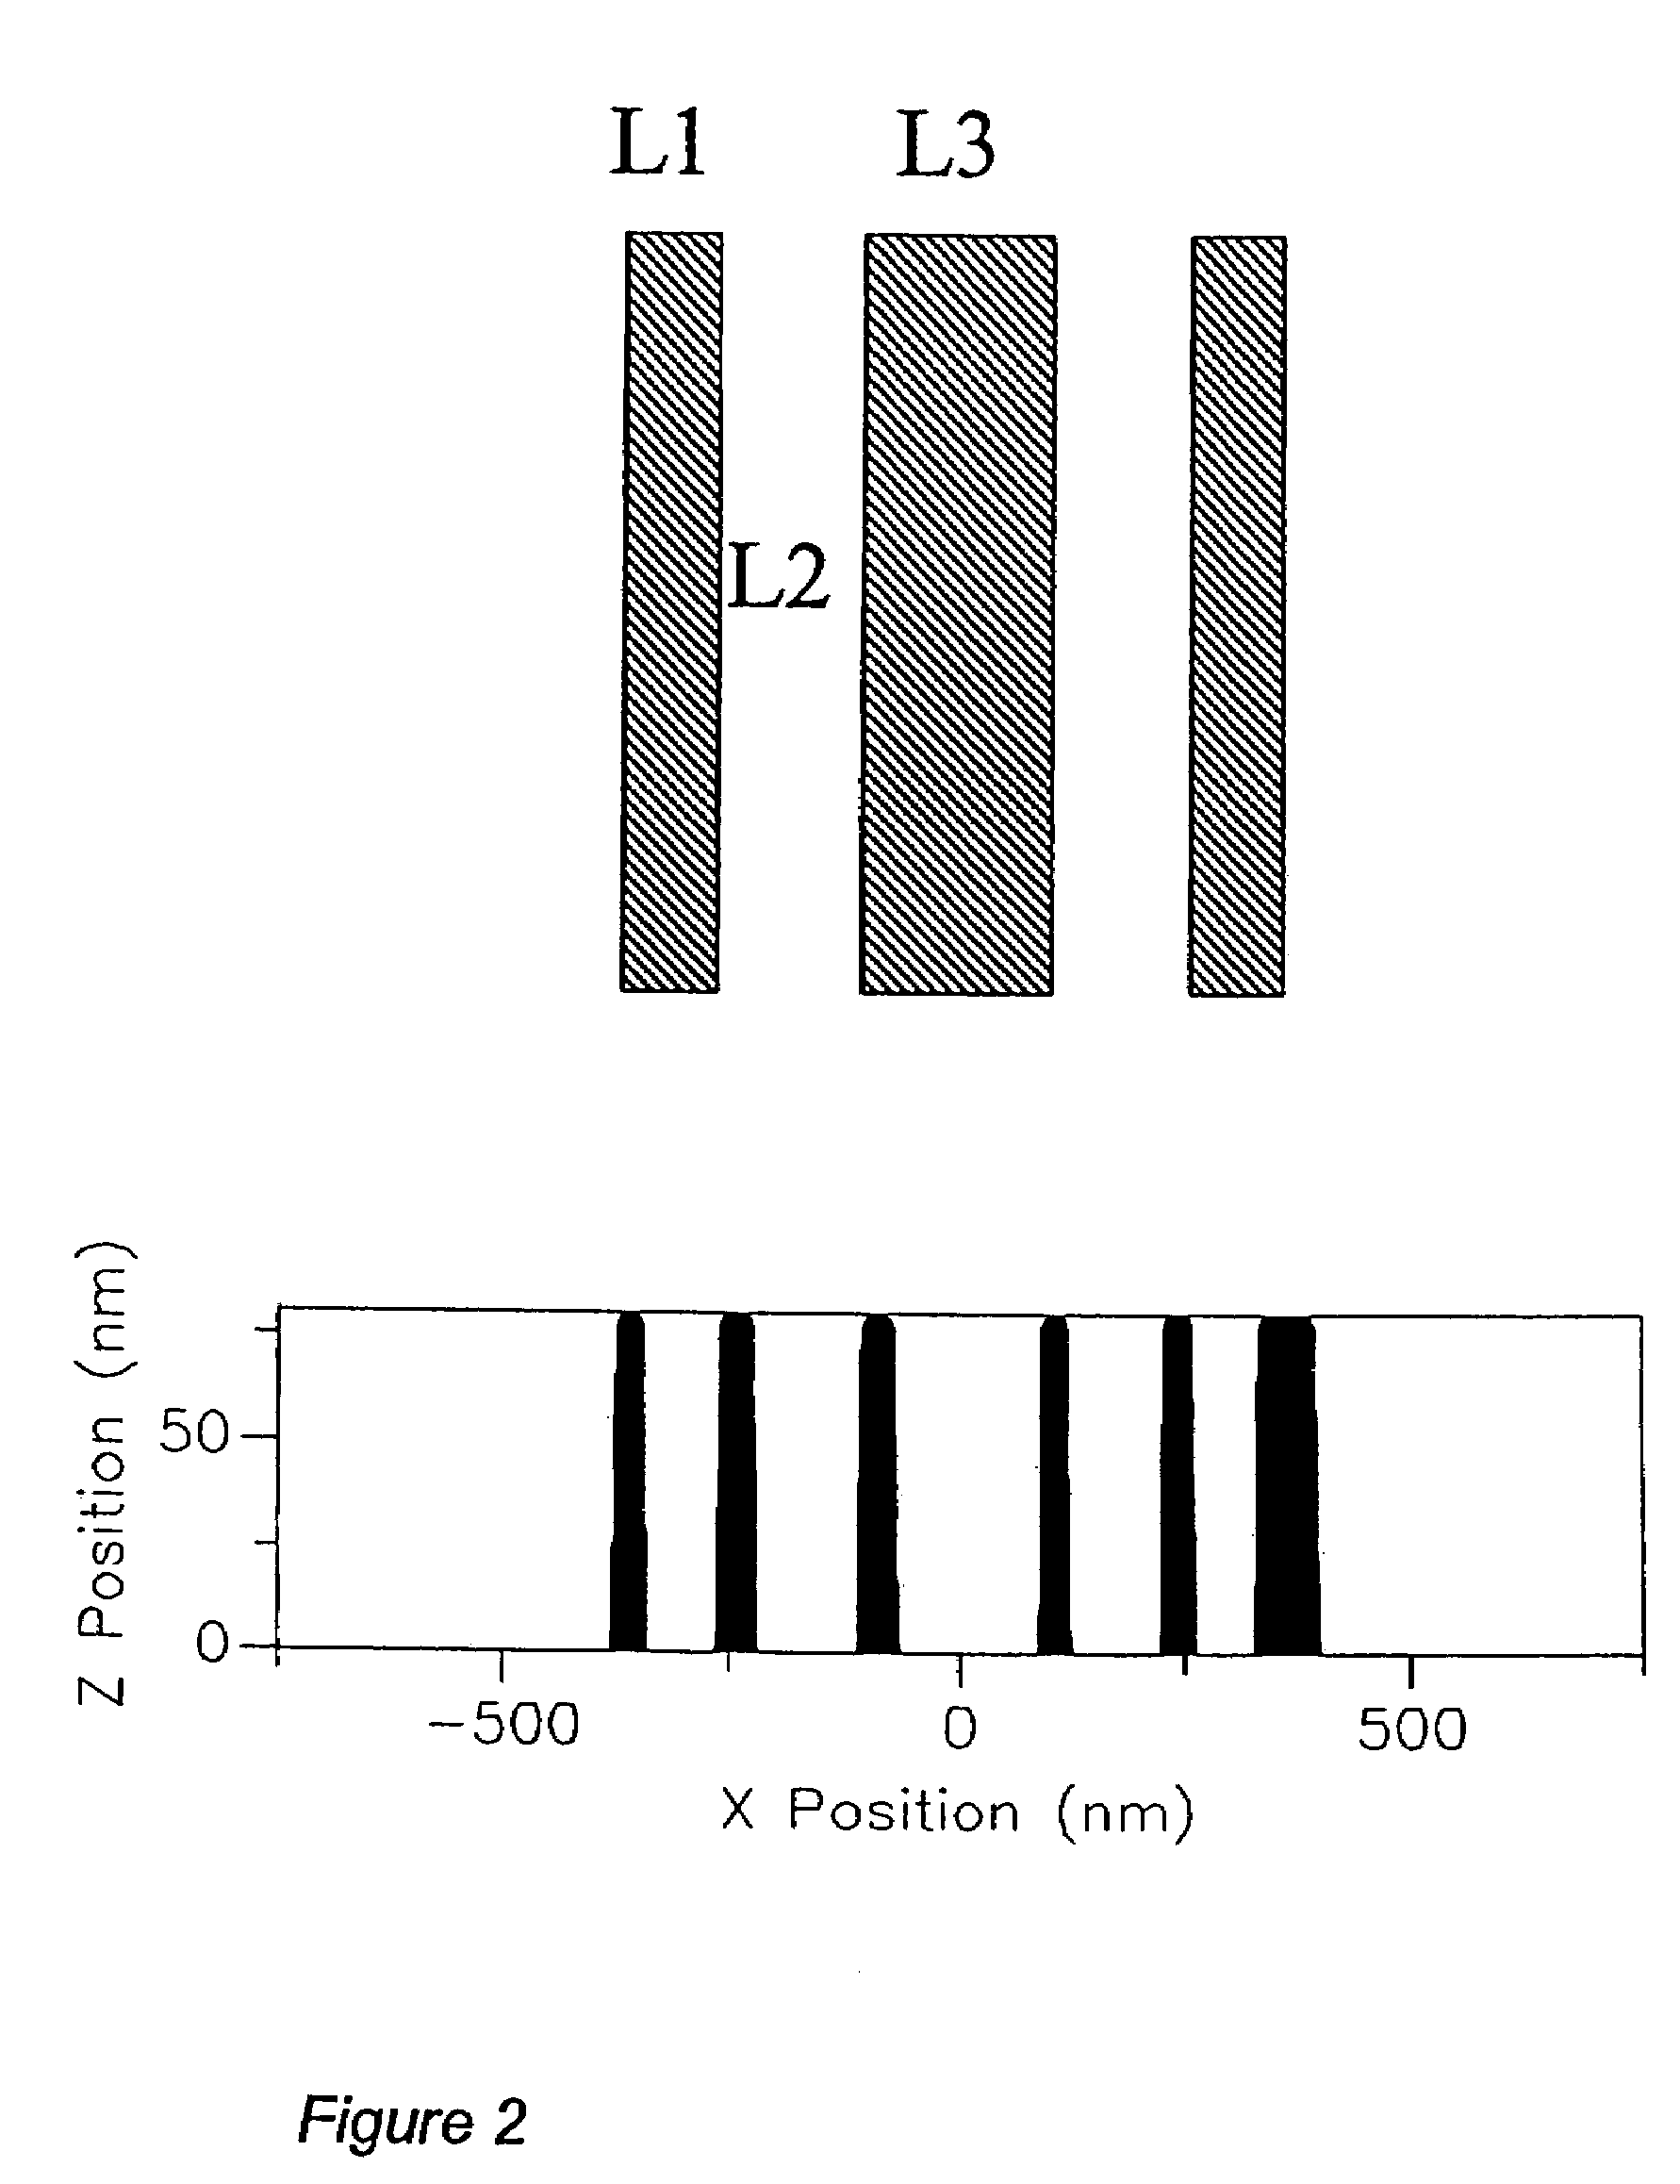 Method for aberration detection and measurement